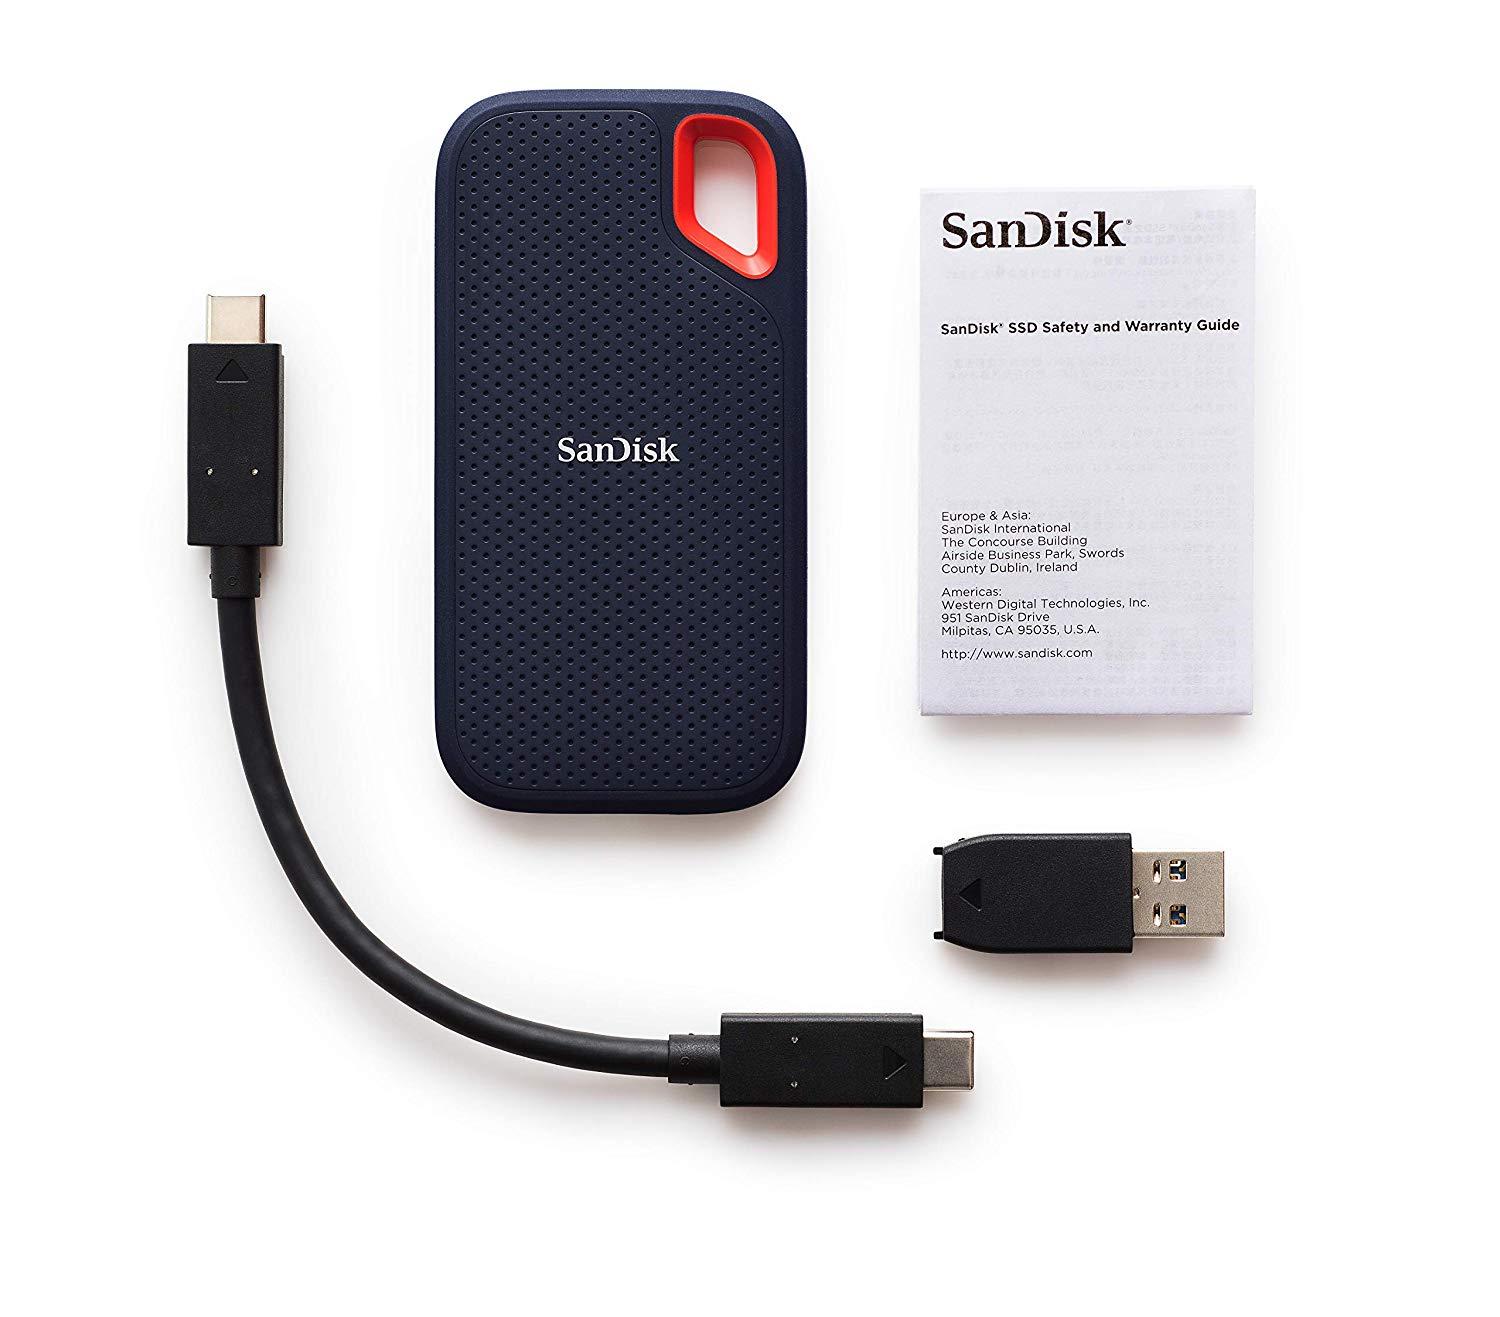 SanDisk Extreme Portable 1TB SSD